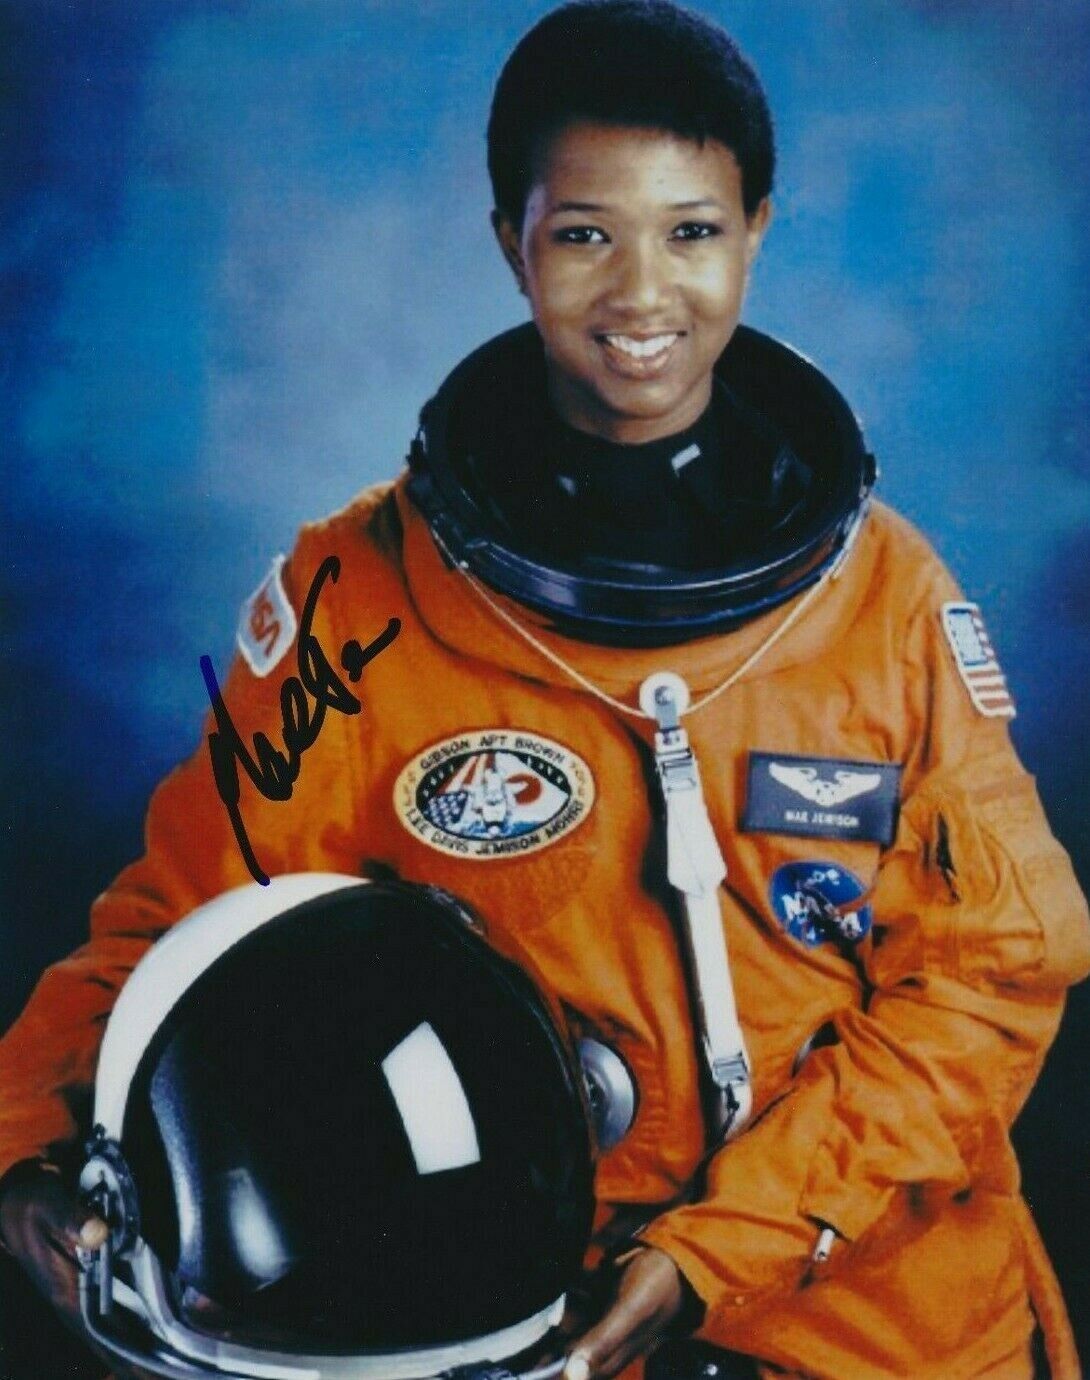 MAE JEMISON SIGNED PHOTO 8X10 COLOR LEGENDARY 1ST AFRICAN AMERICAN WOMAN SPACE